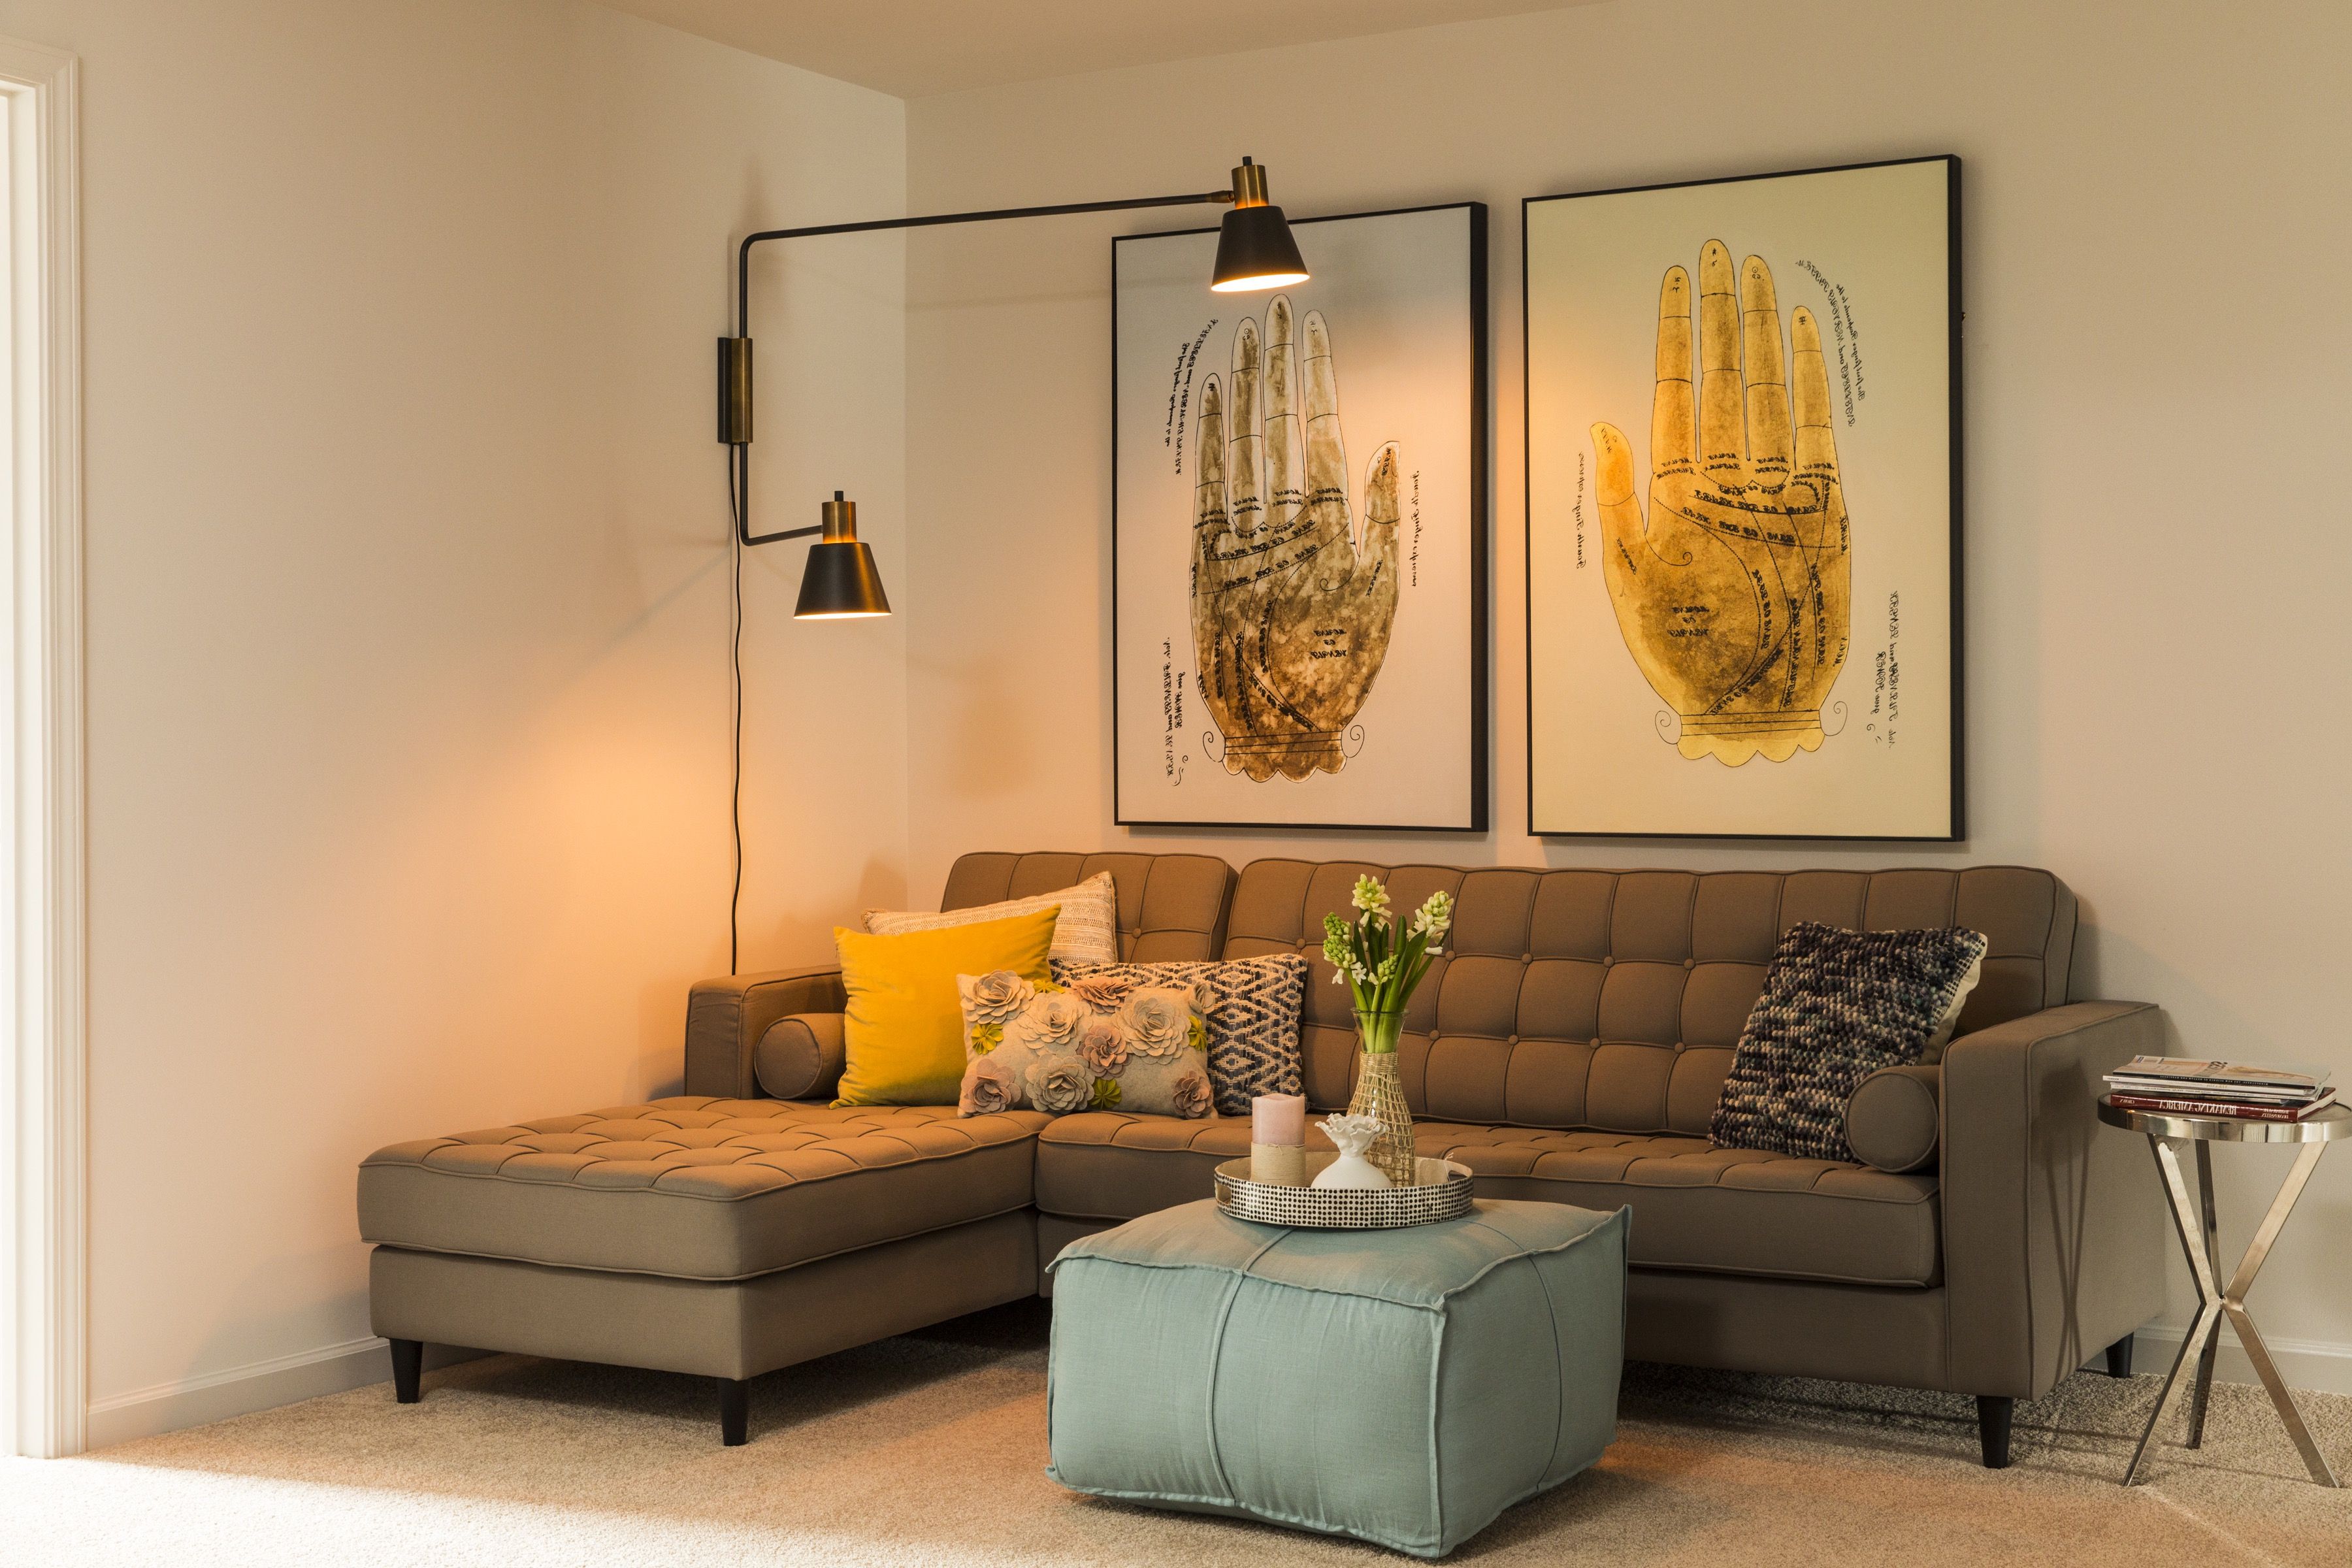 Modern Living Room With Framed Wall Pictures With Floor Lamp (View 16 of 30)